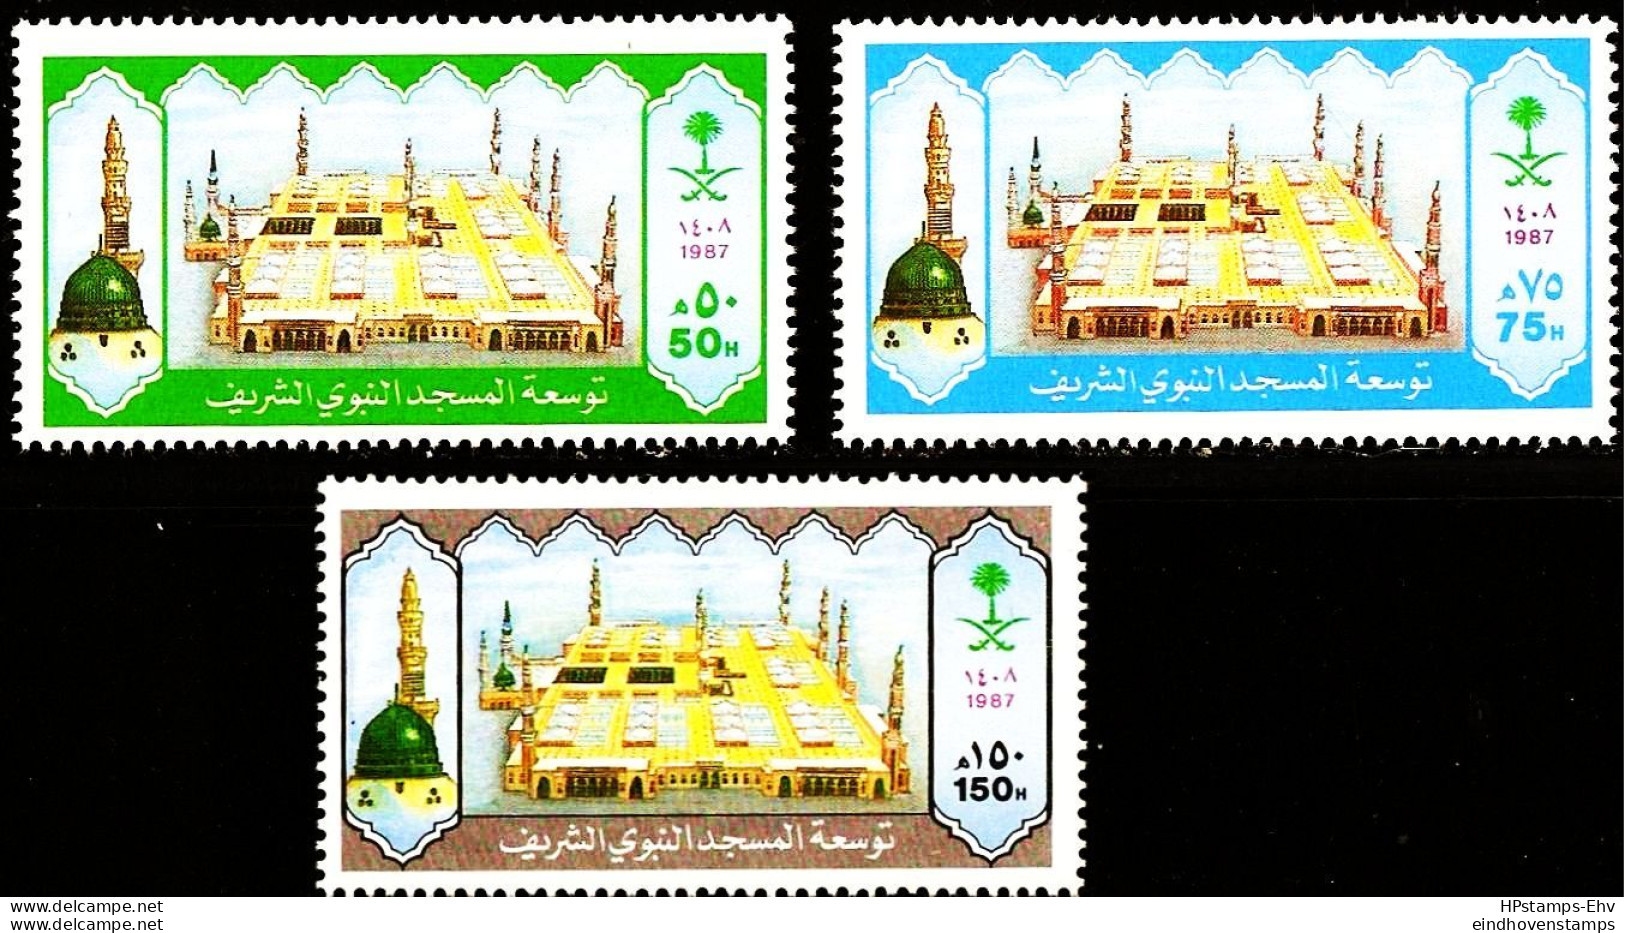 Saudi Arabia 1987 Expansion Of Prophet's Mosque Expansion, Al-Machid An-Nabawi, 3 Values MNH SA-87-16 - Islam